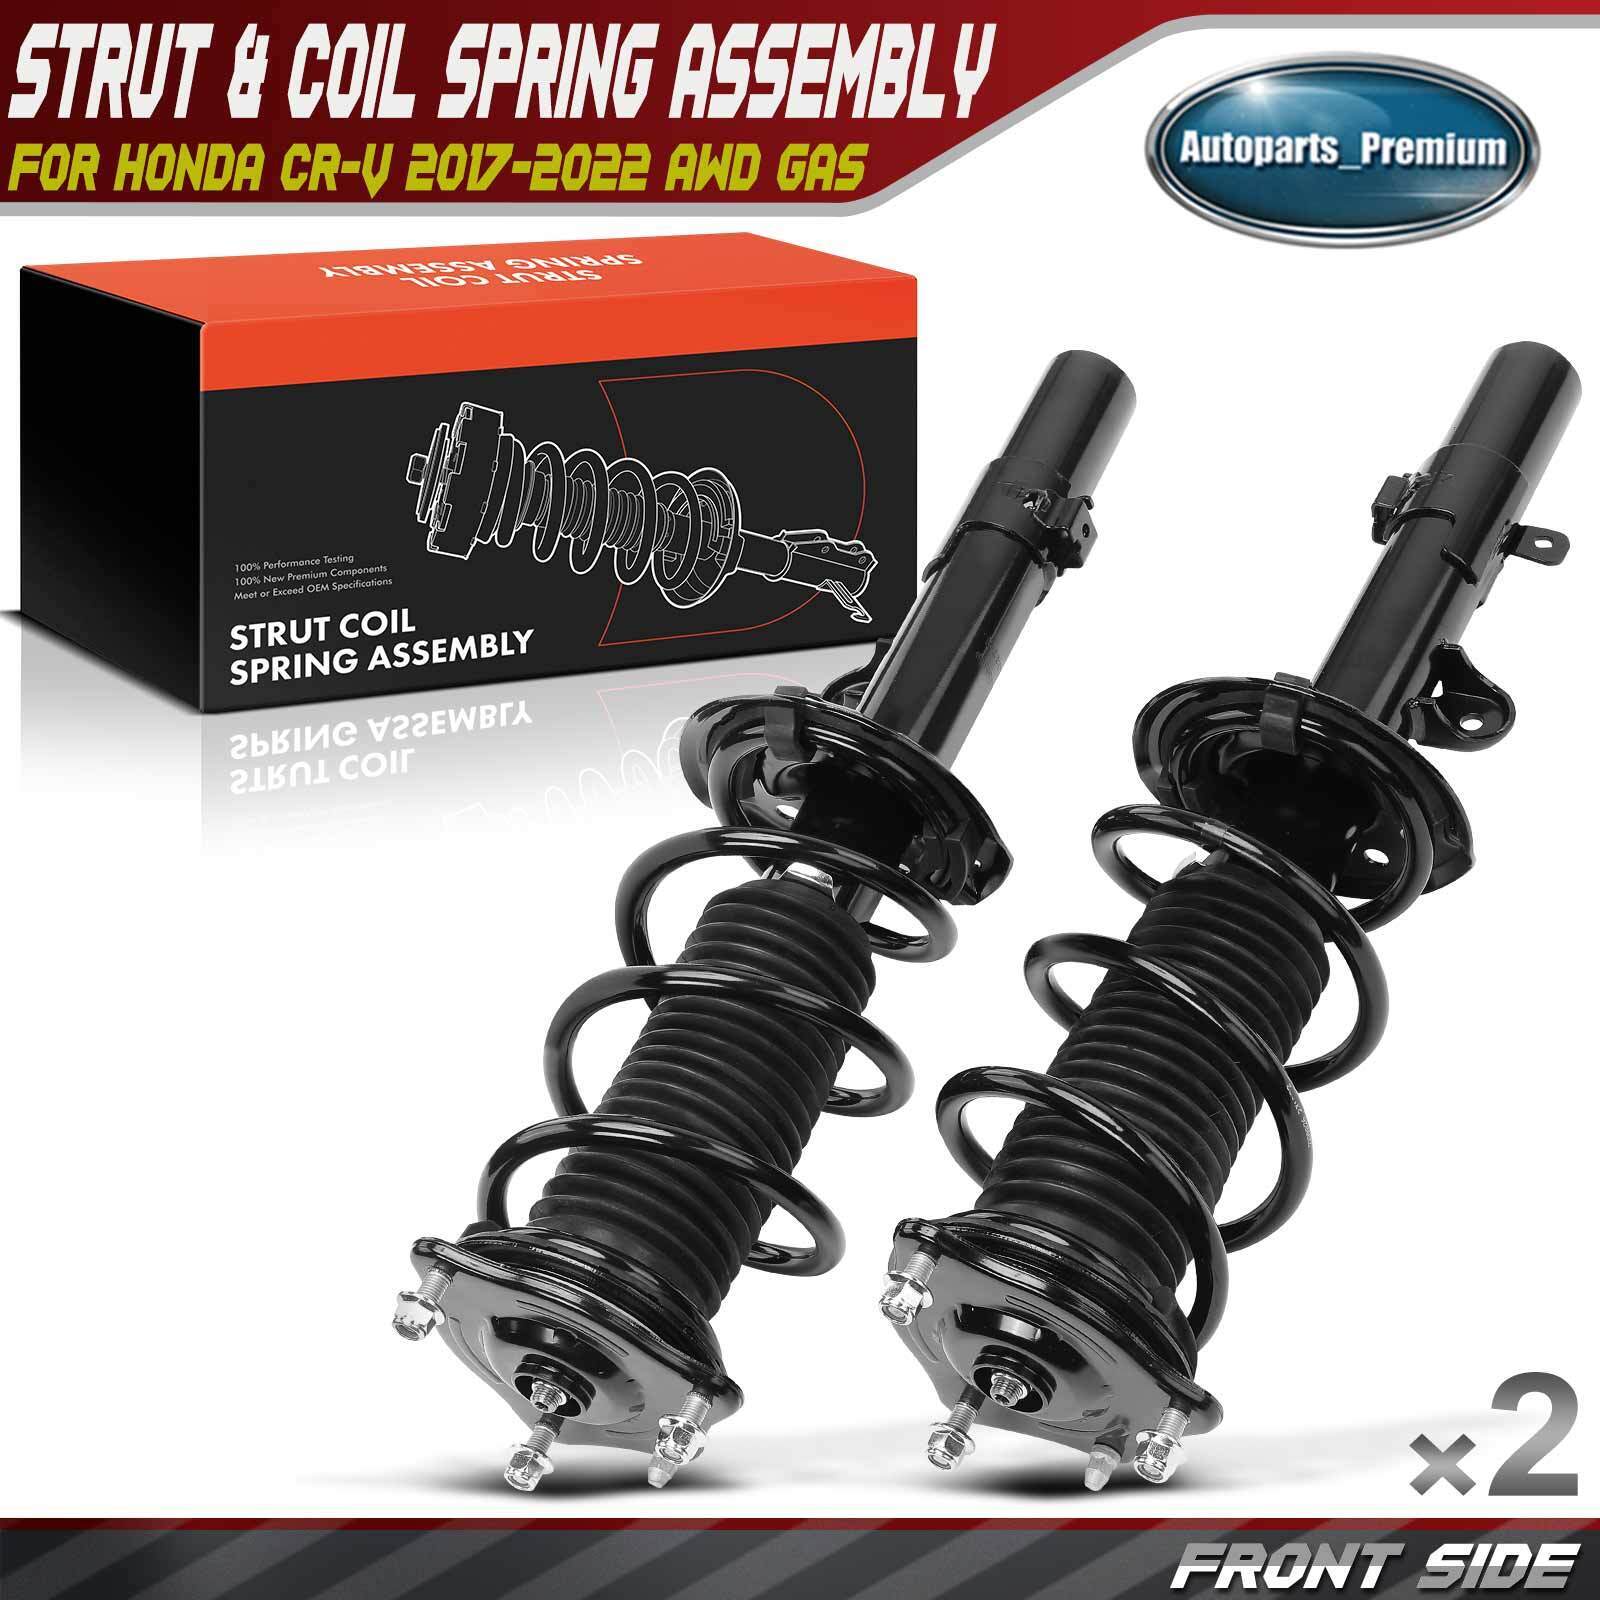 2x Front Complete Strut & Coil Spring Assembly for Honda CR-V 2017-2022 AWD GAS